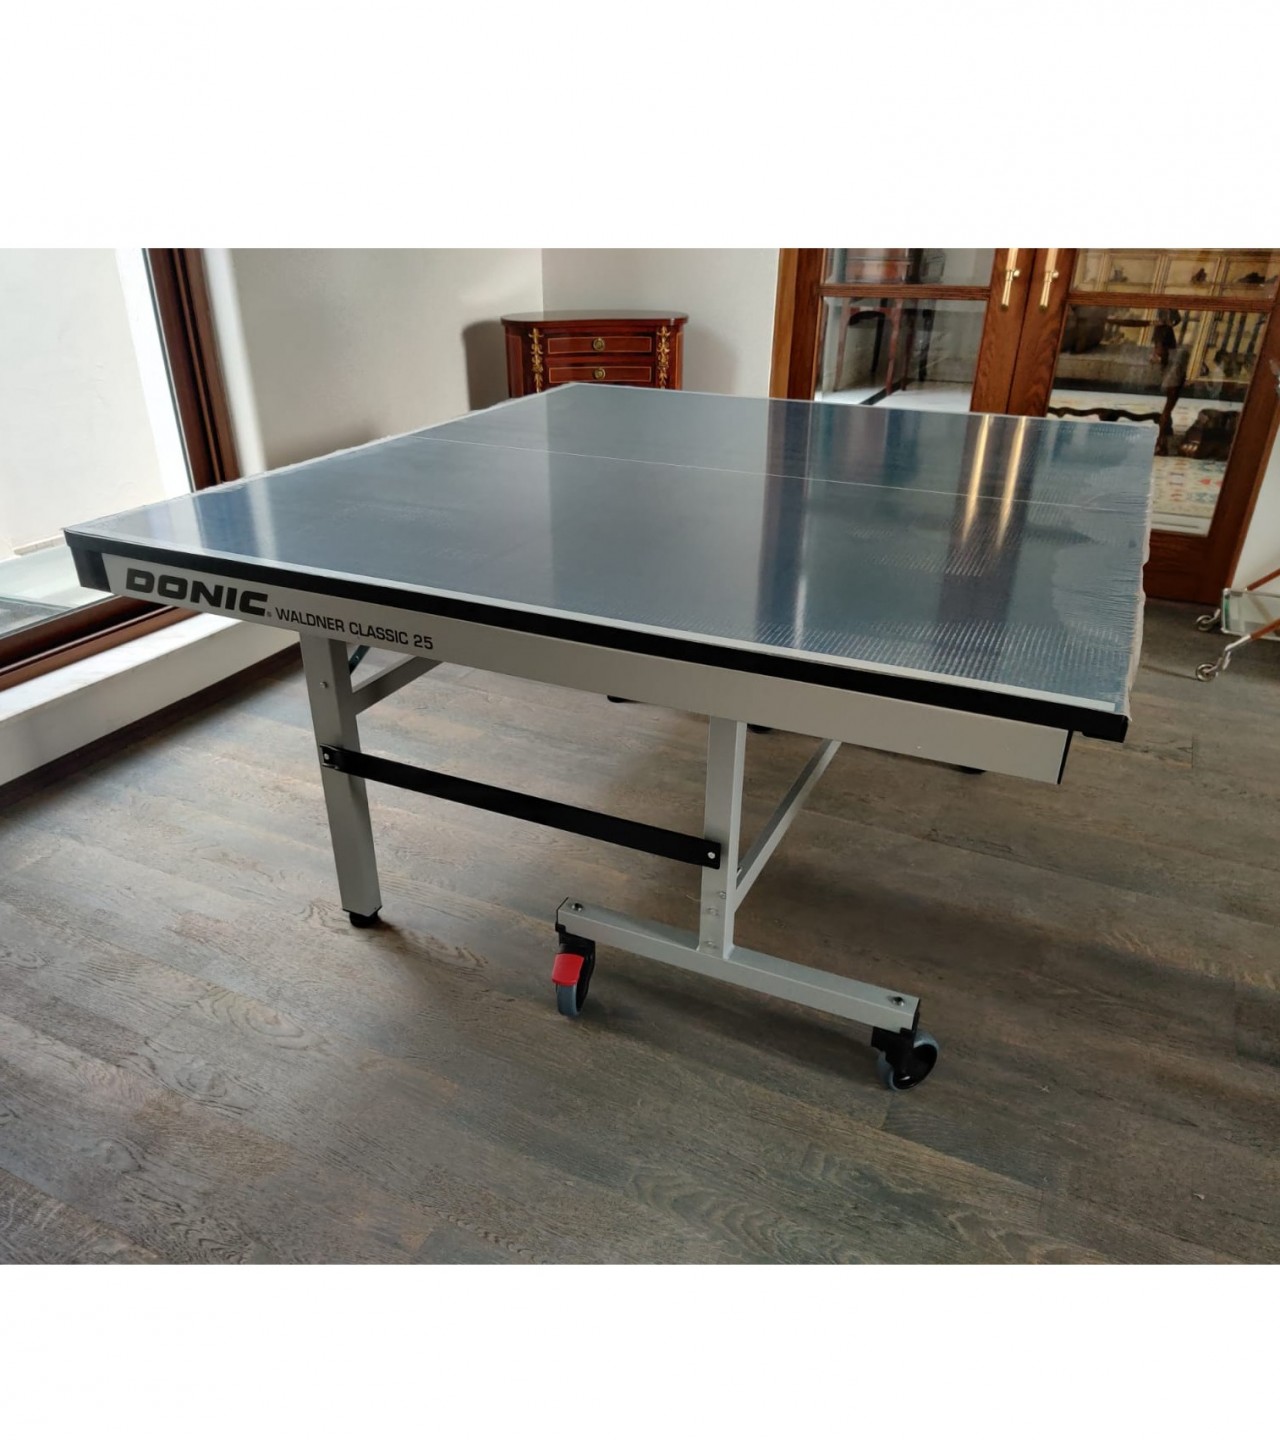 DONIC WALDNER CLASSIC 25 TABLE TENNIS TABLE